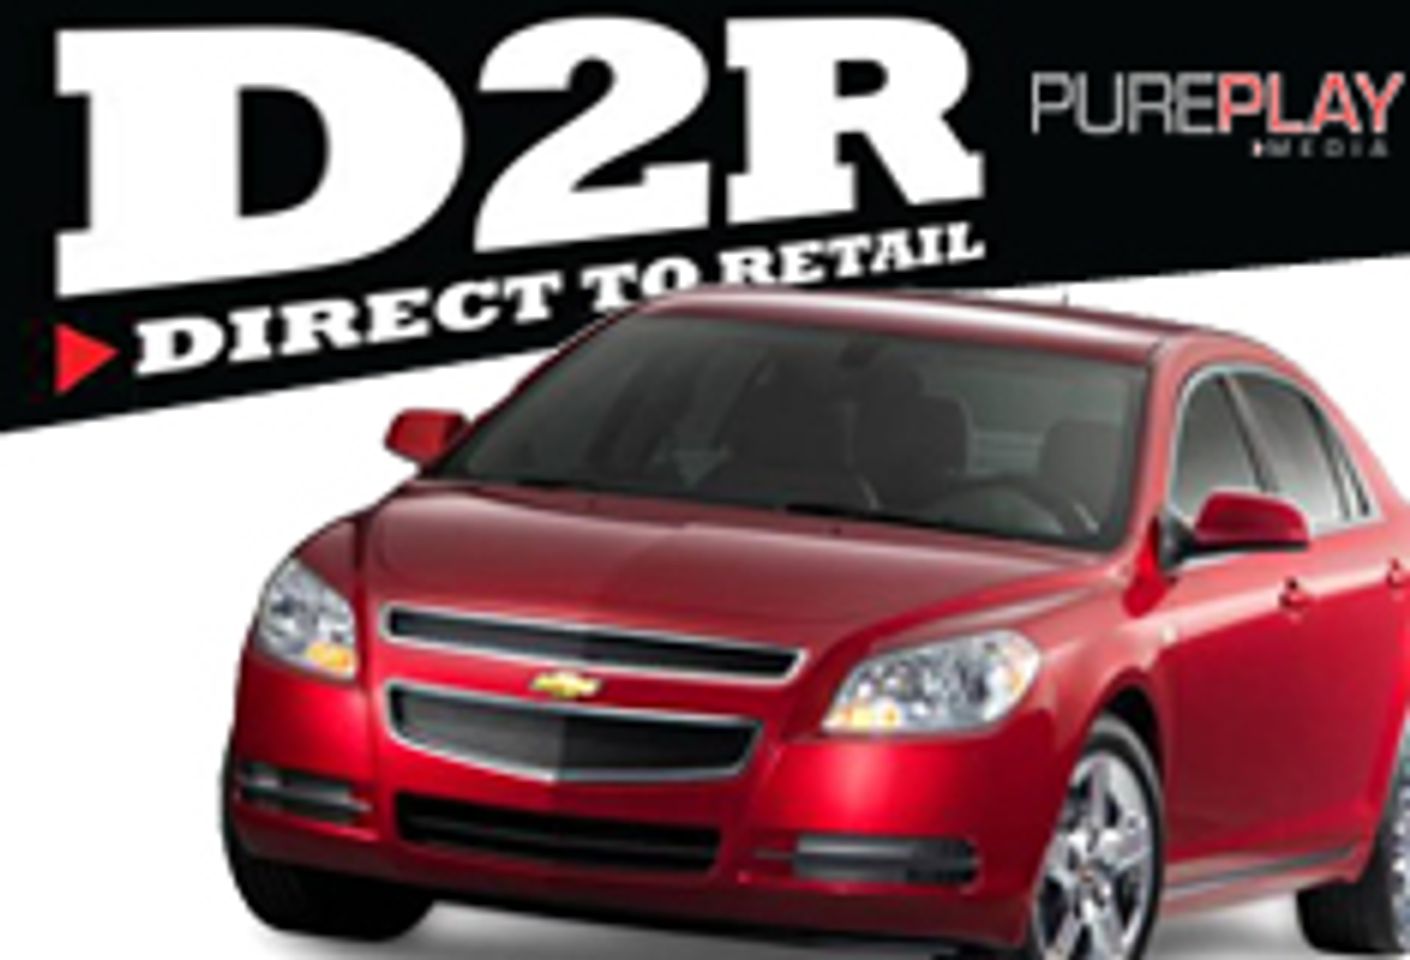 Pure Play Media Invites Retailers to Win a New Car, Save Cash